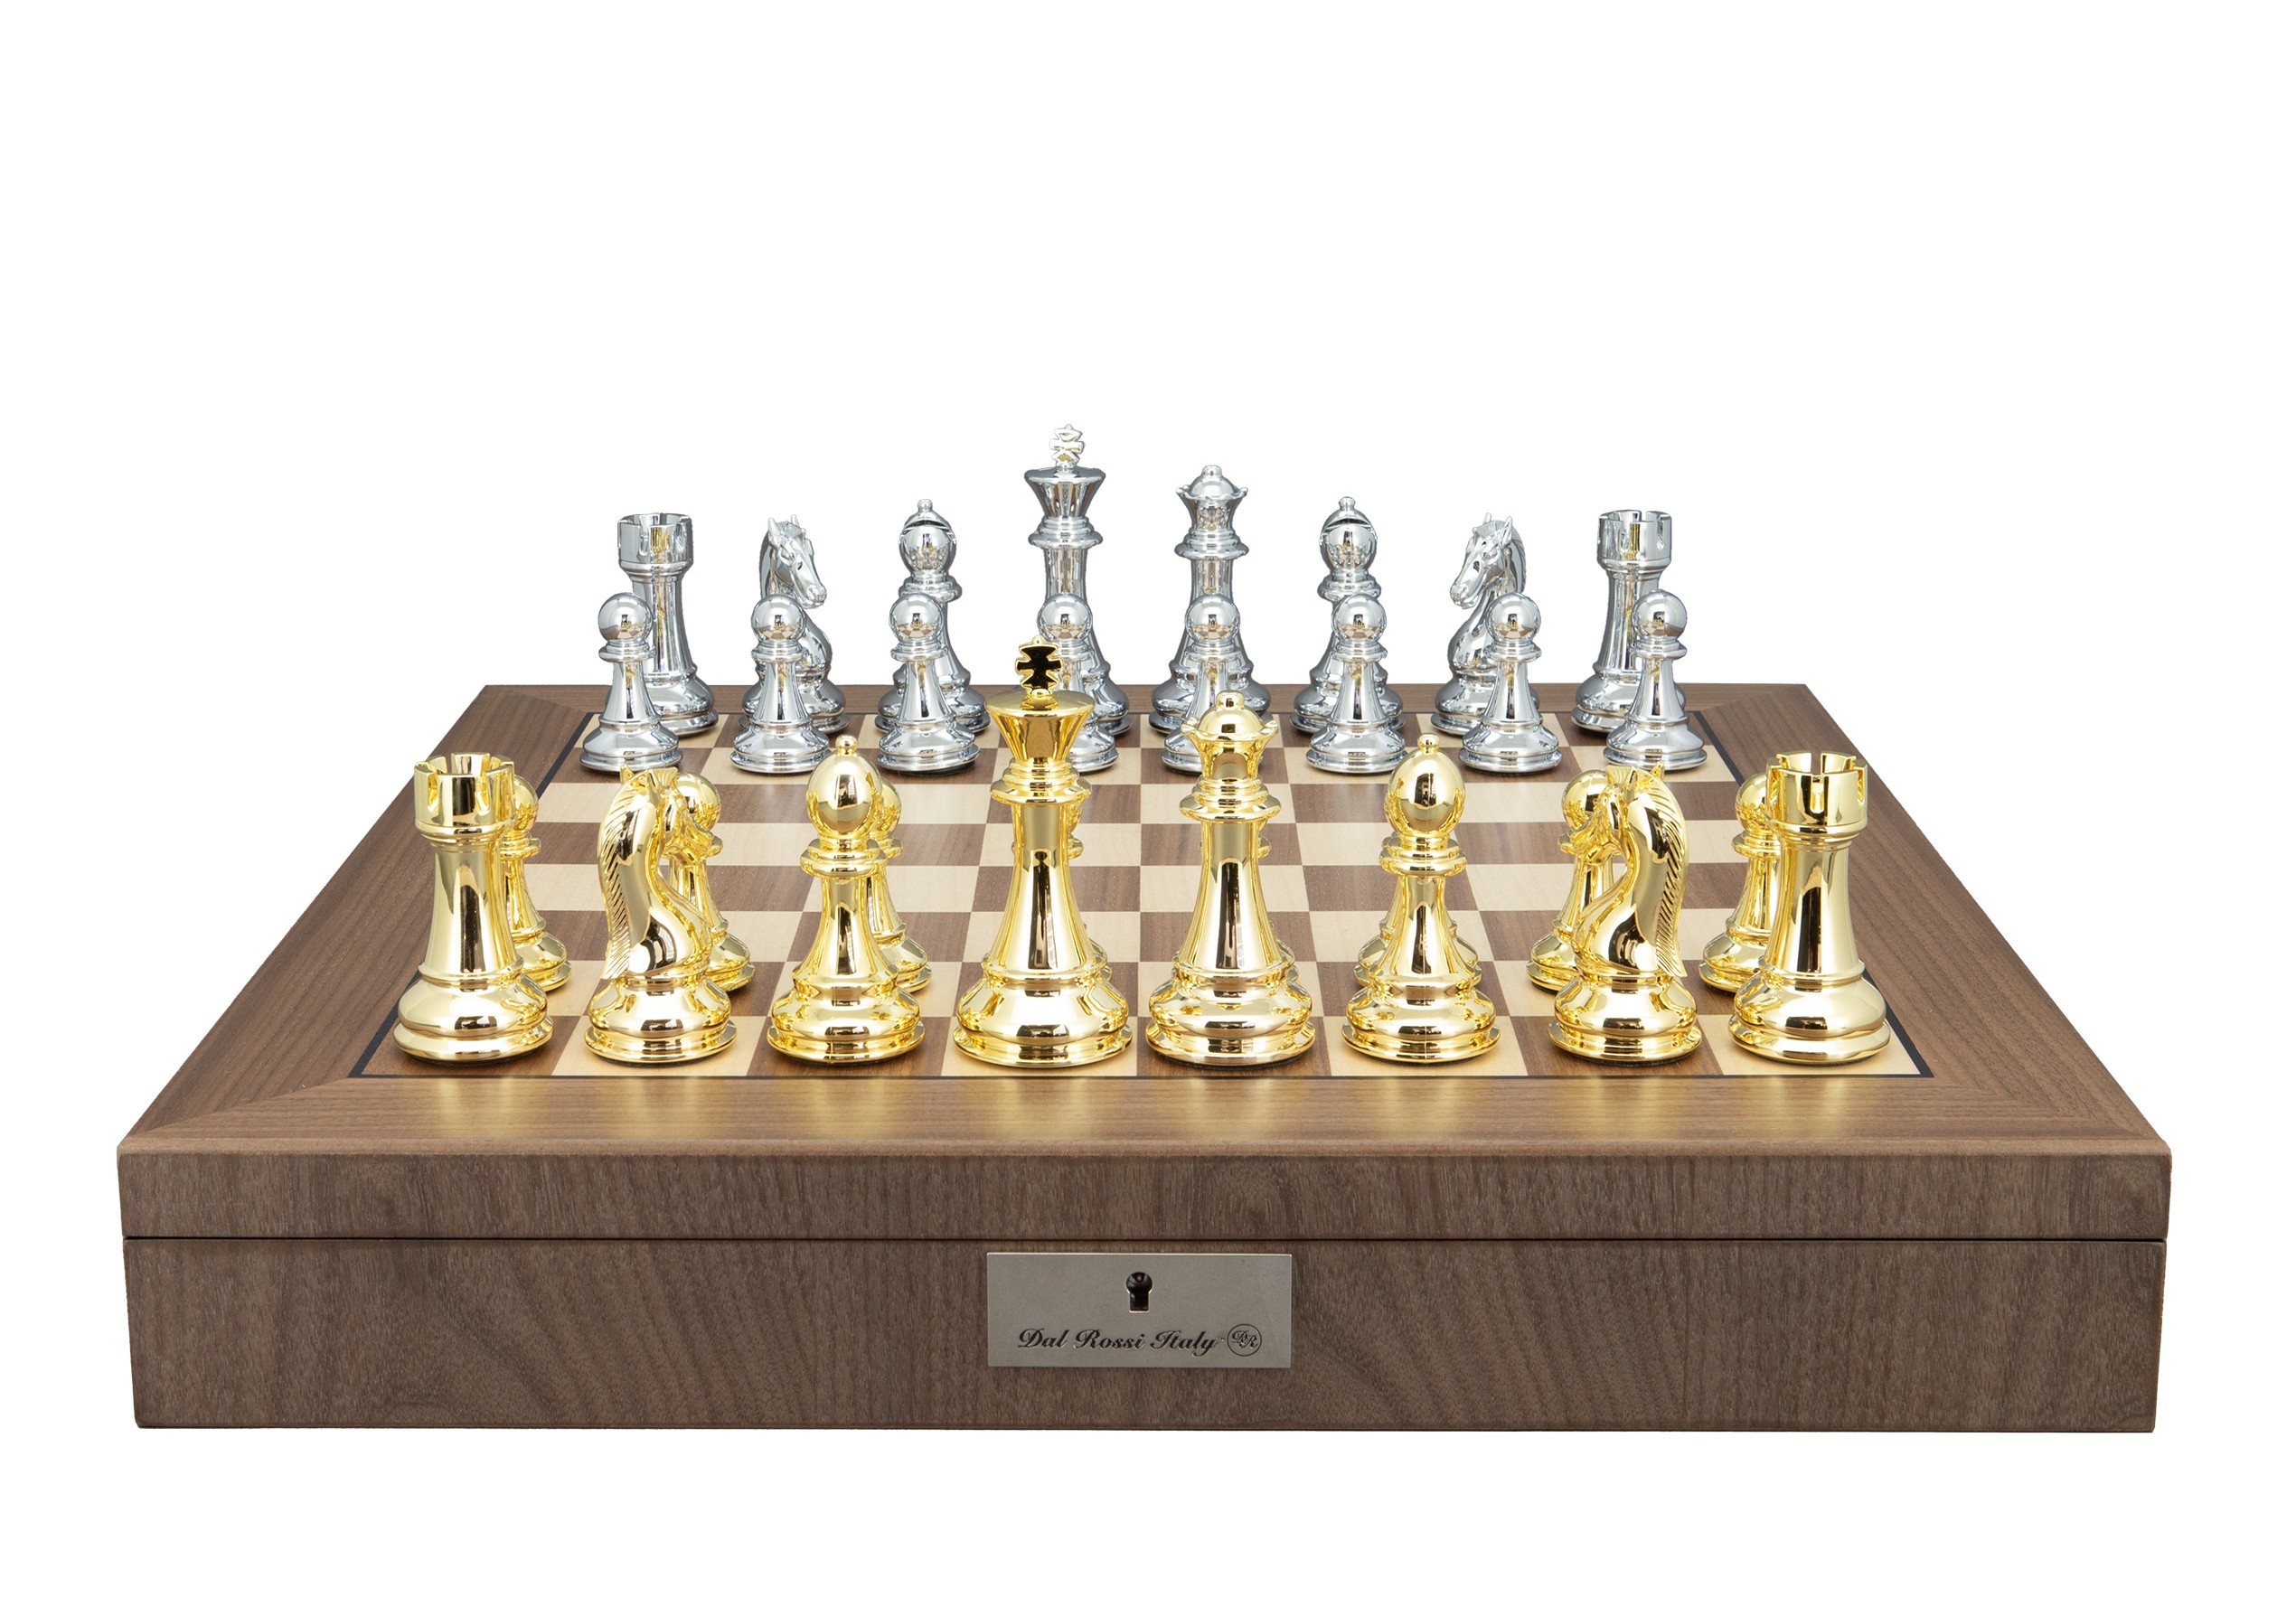 Dal Rossi Italy Gold and Silver Weighted Chess Pieces 110mm Chessmen on a Walnut Inlaid Chess Box with Compartments 20" 